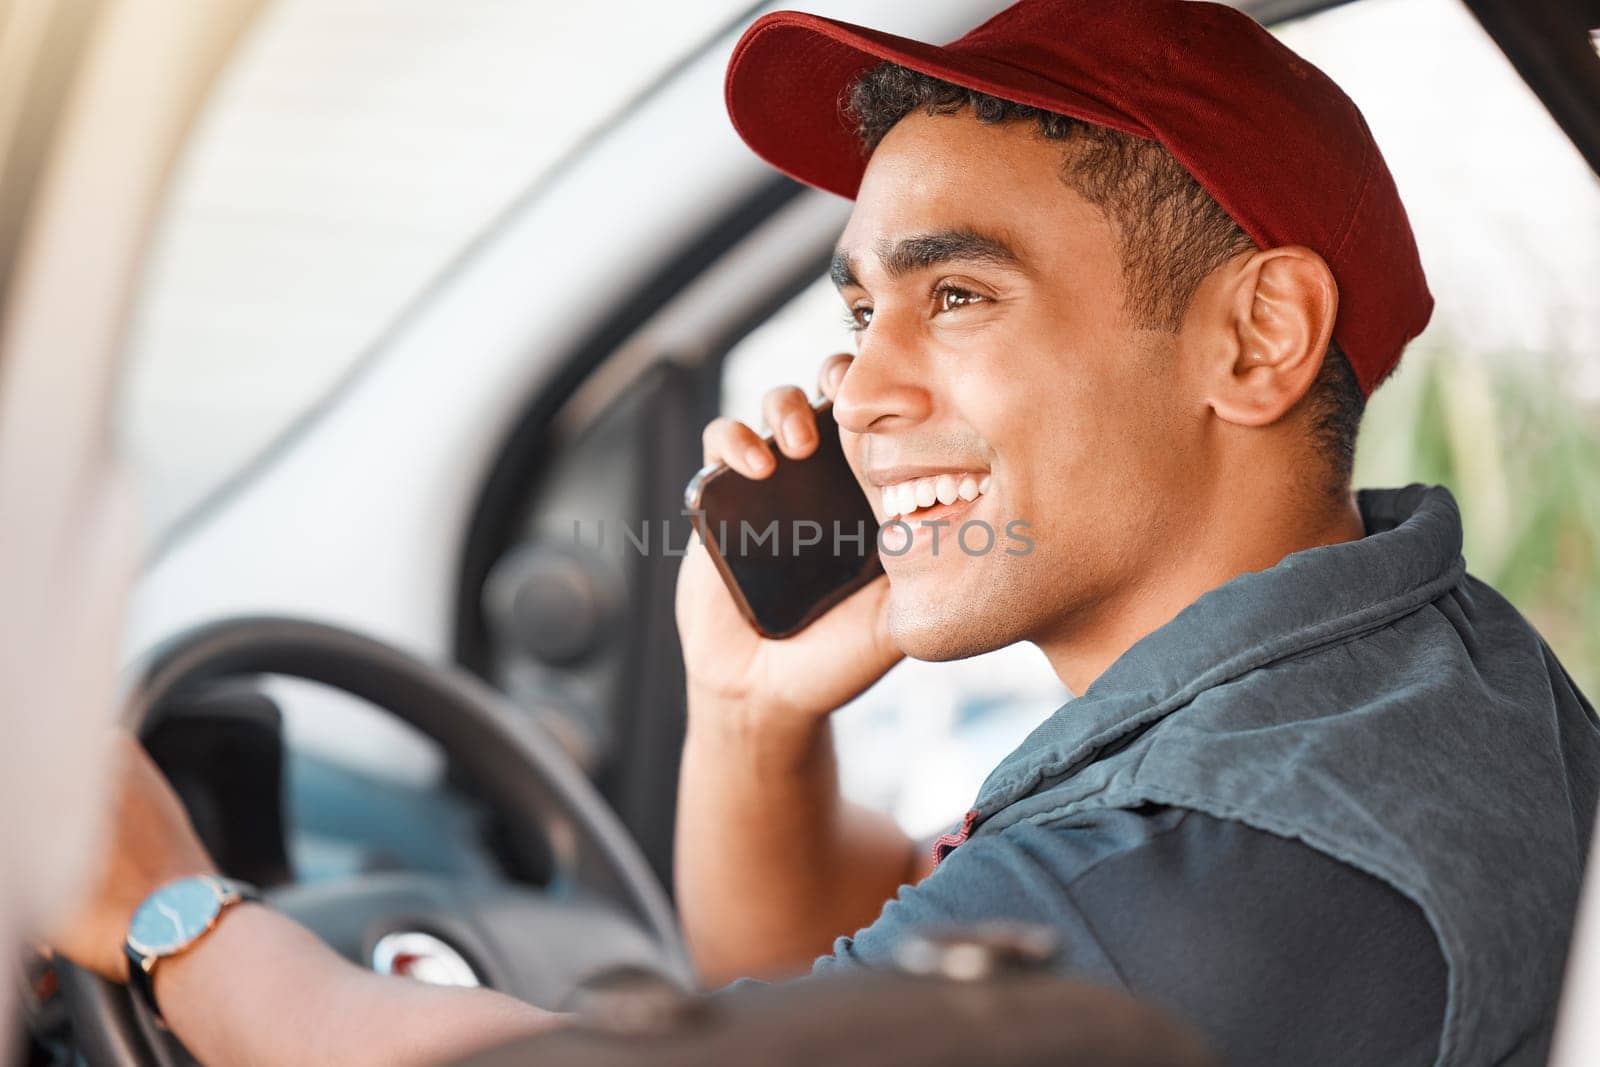 Phone call, driving and courier talking on a mobile while doing a delivery. Happy, young and driver working in logistics, ecommerce or transportation industry speaking on a smartphone in a car by YuriArcurs